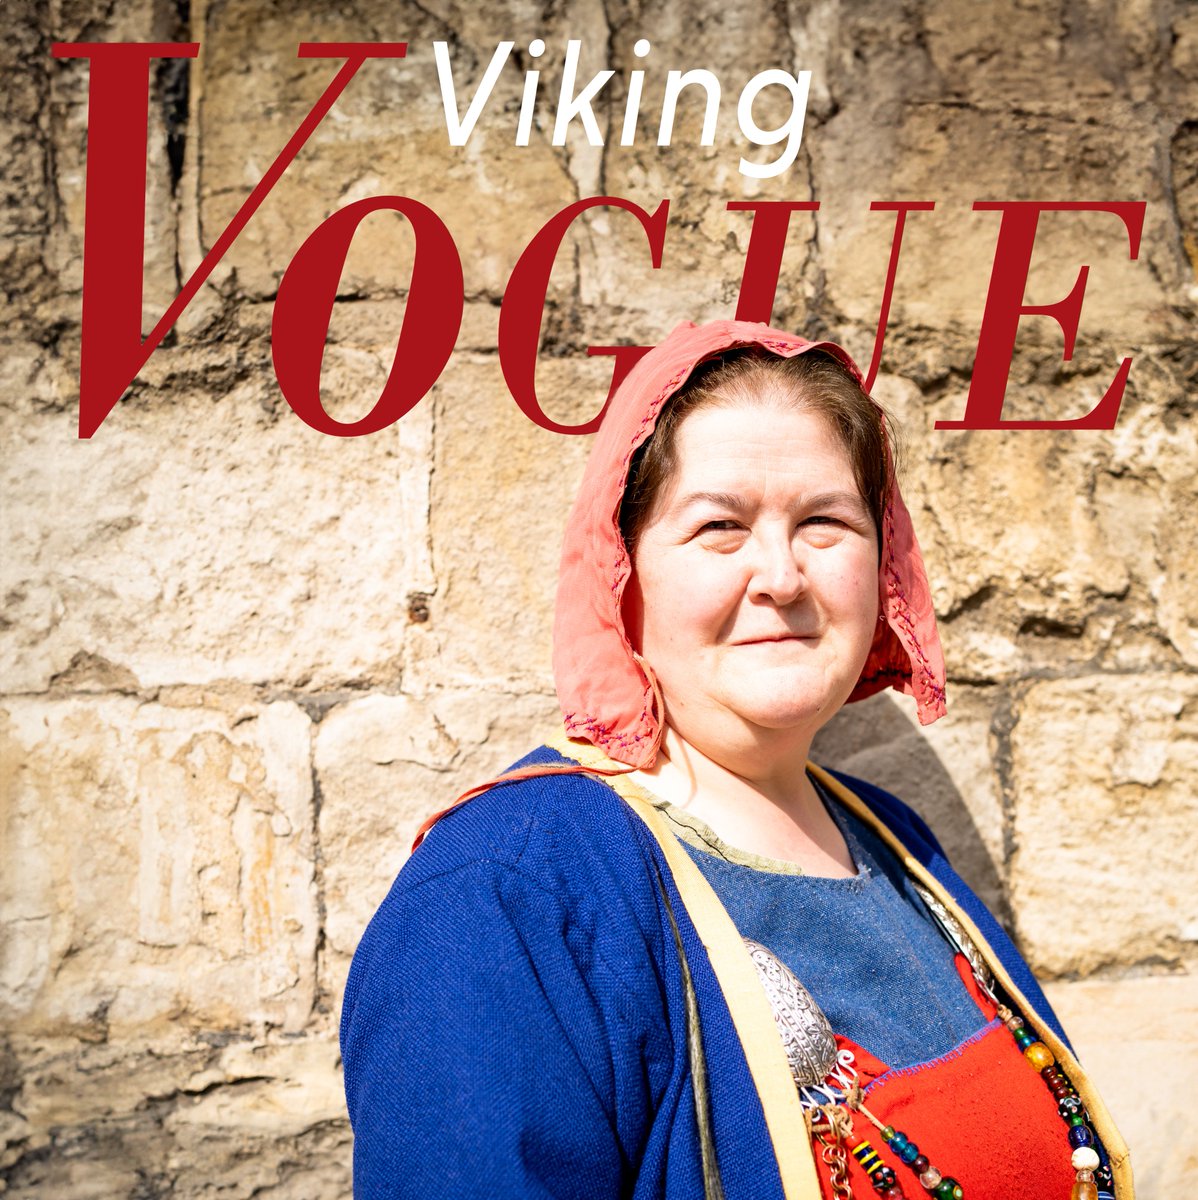 Viking Vogue 👚 This York Fashion Week, we're open after hours for an exclusive event about Viking clothing, textiles and jewellery! Book now via the link in our bio 🔗 #Vikings #Fashion #York #VikingFashion